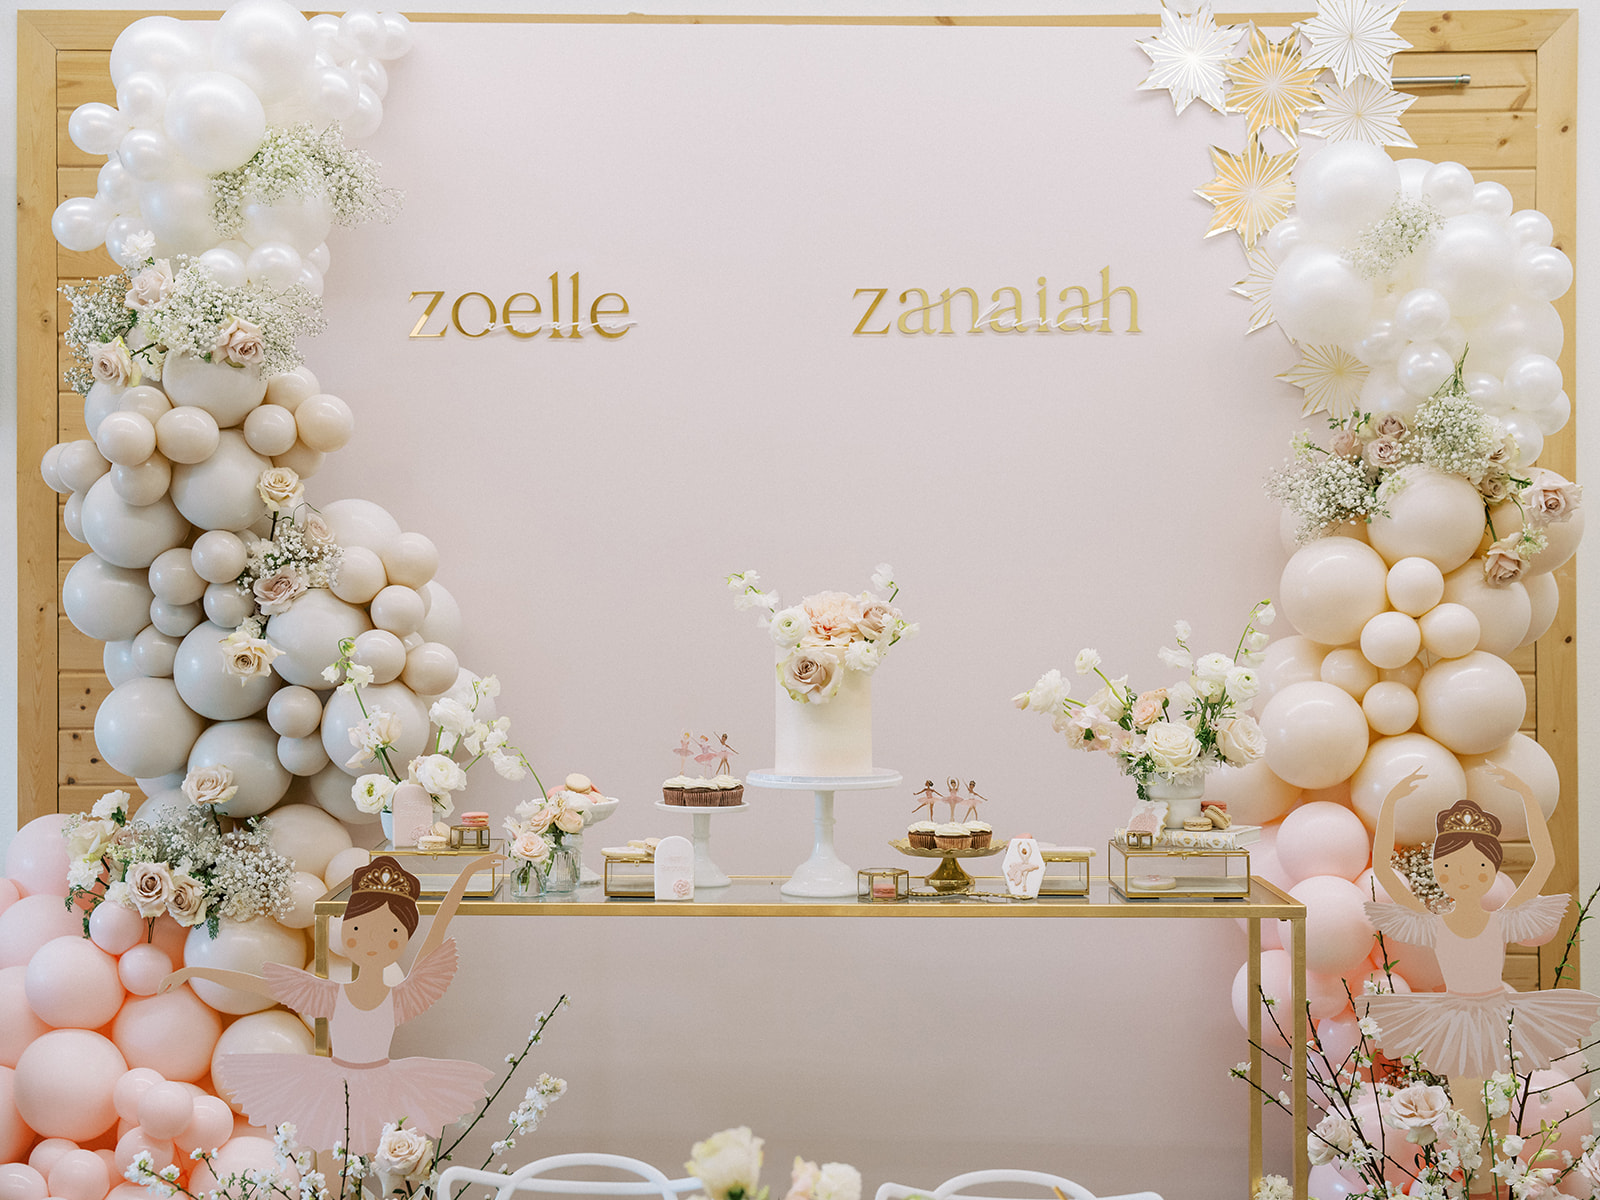 Ballerina Birthday backdrop for Zoelle and Zanaiah with dessert spread, florals, and balloons.